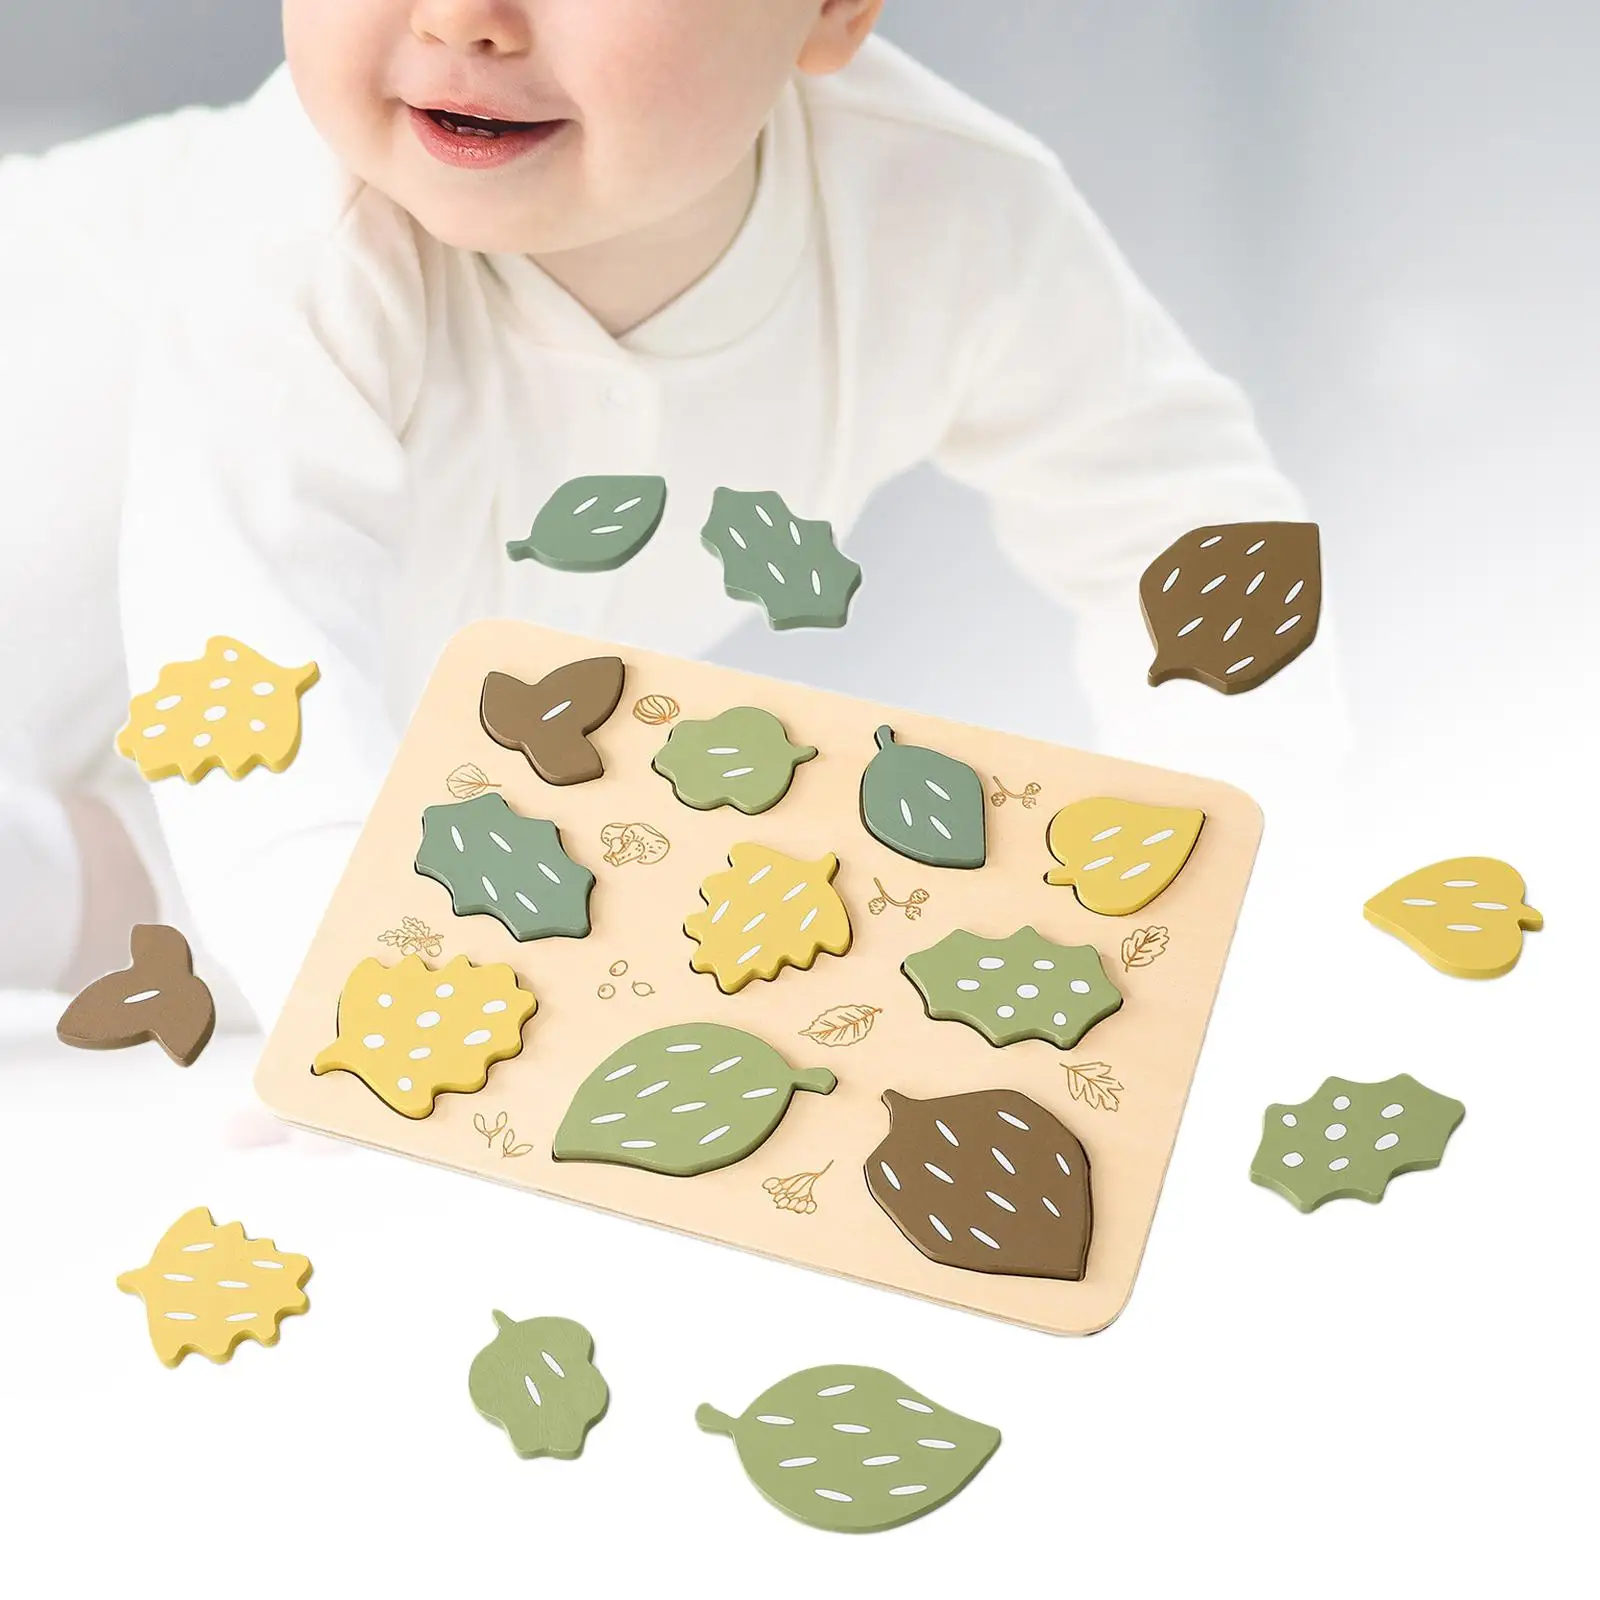 Leaf Jigsaw Puzzles Montessori Stacking Blocks Colorful Shape for Preschool Boys Toddlers